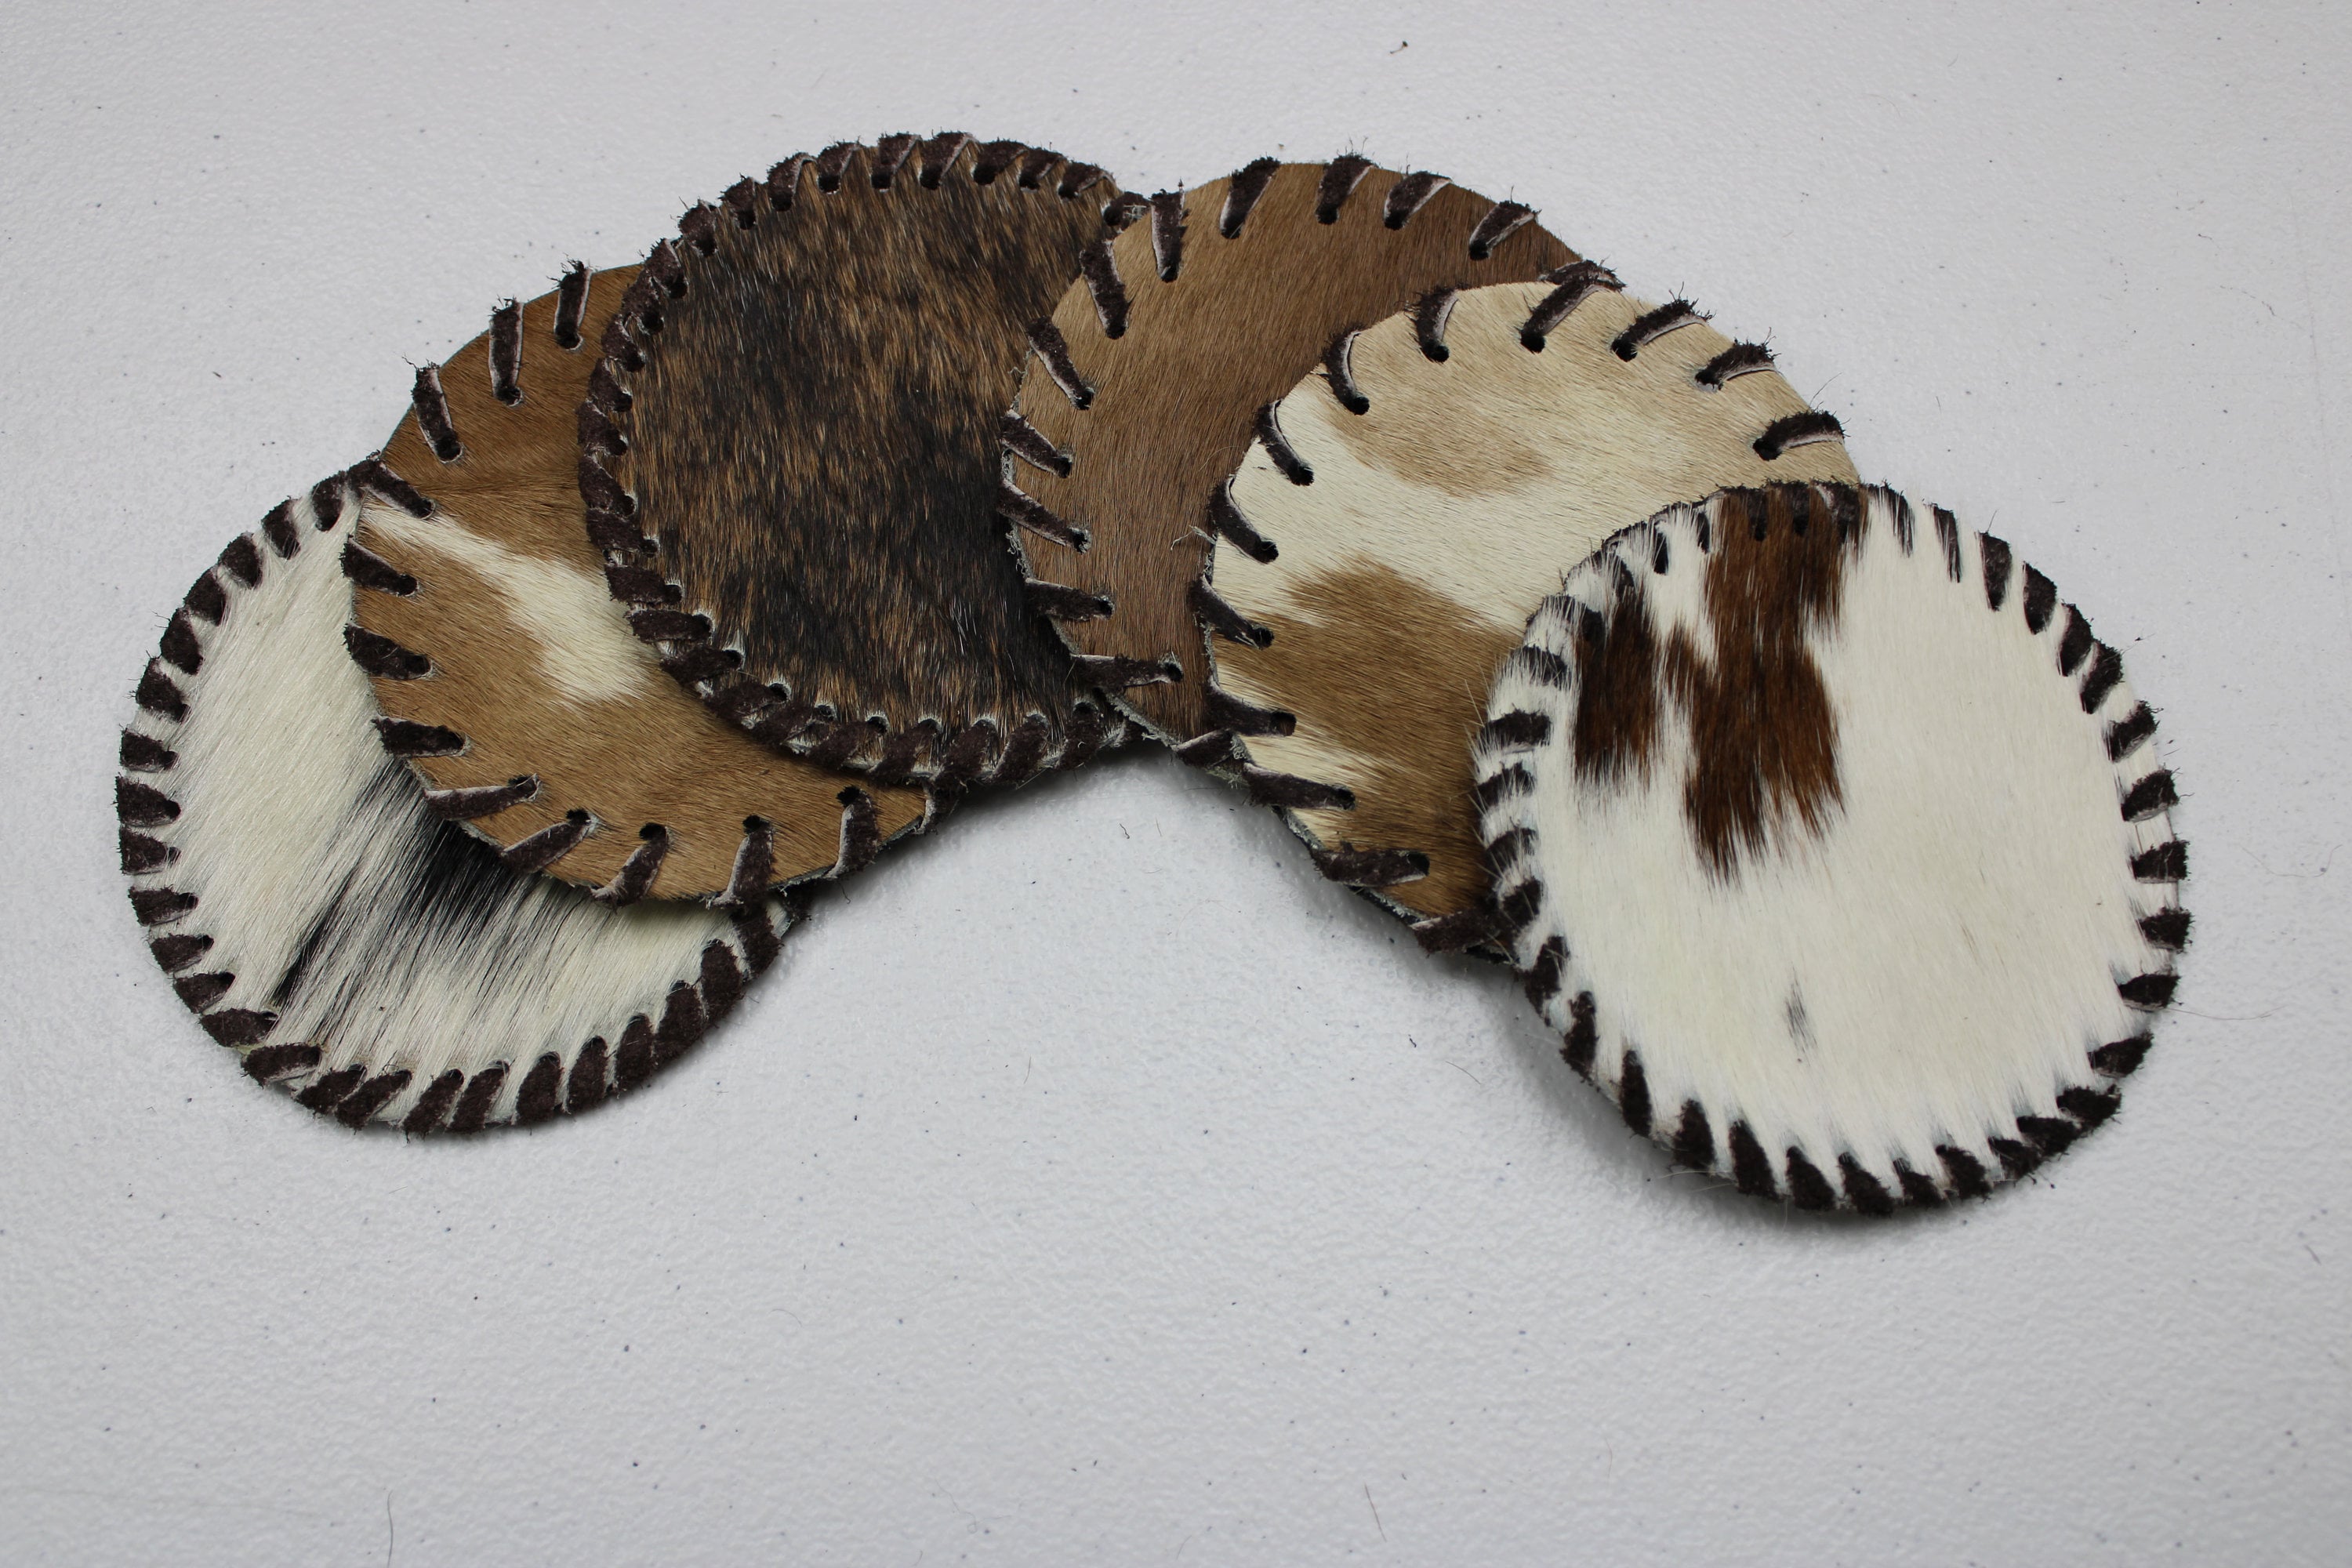 Spade Cowhide Coaster Assorted - Size 4.5 Inches - Genuine Cowhide